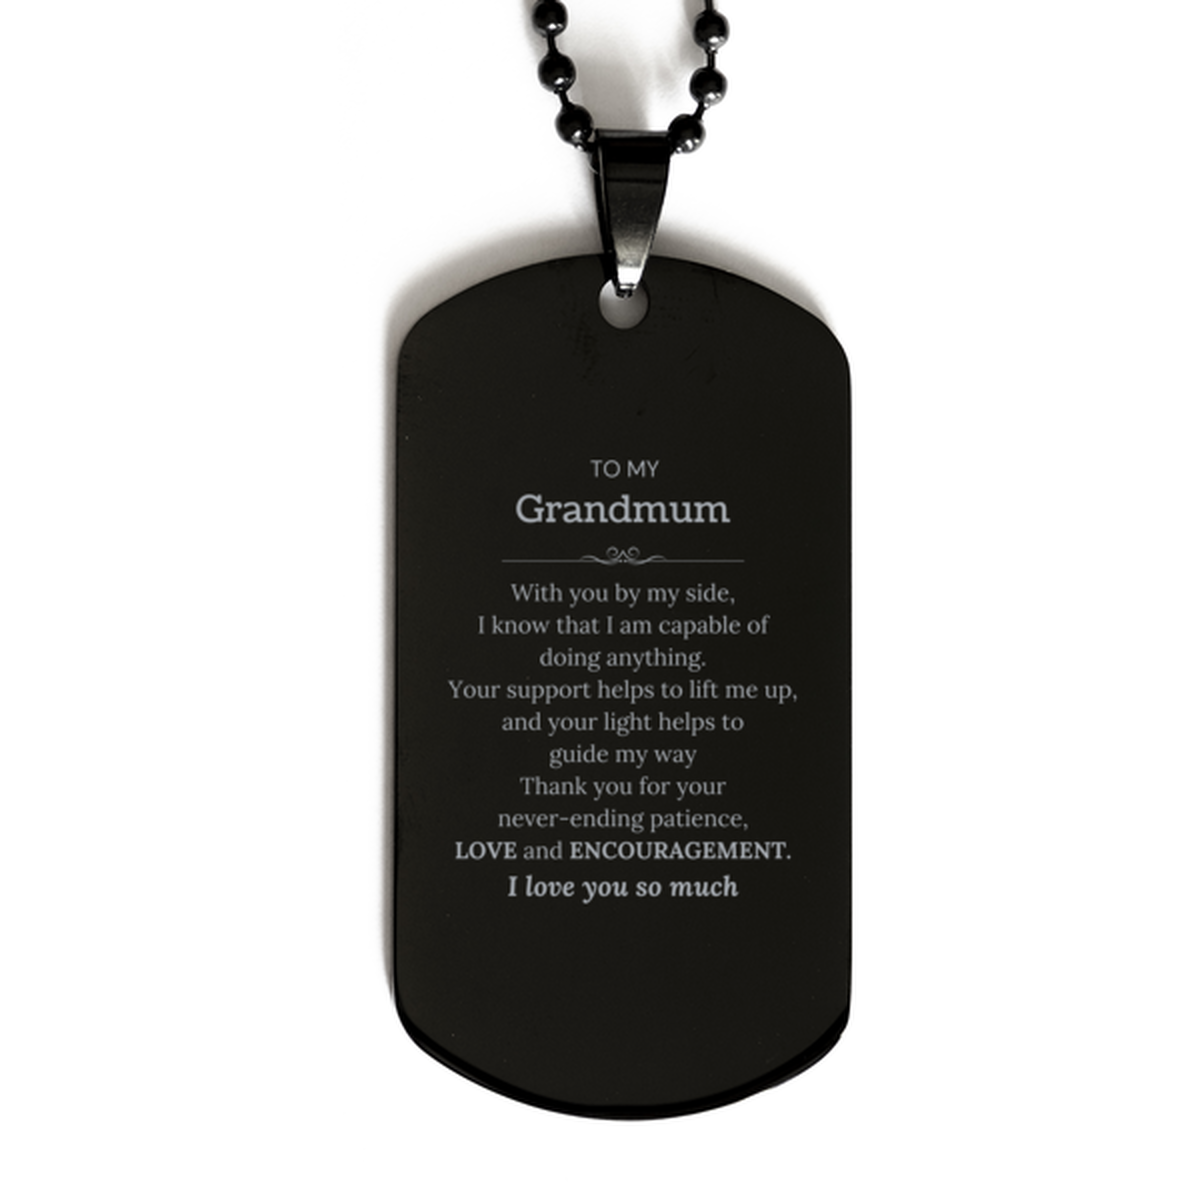 Appreciation Grandmum Black Dog Tag Gifts, To My Grandmum Birthday Christmas Wedding Keepsake Gifts for Grandmum With you by my side, I know that I am capable of doing anything. I love you so much